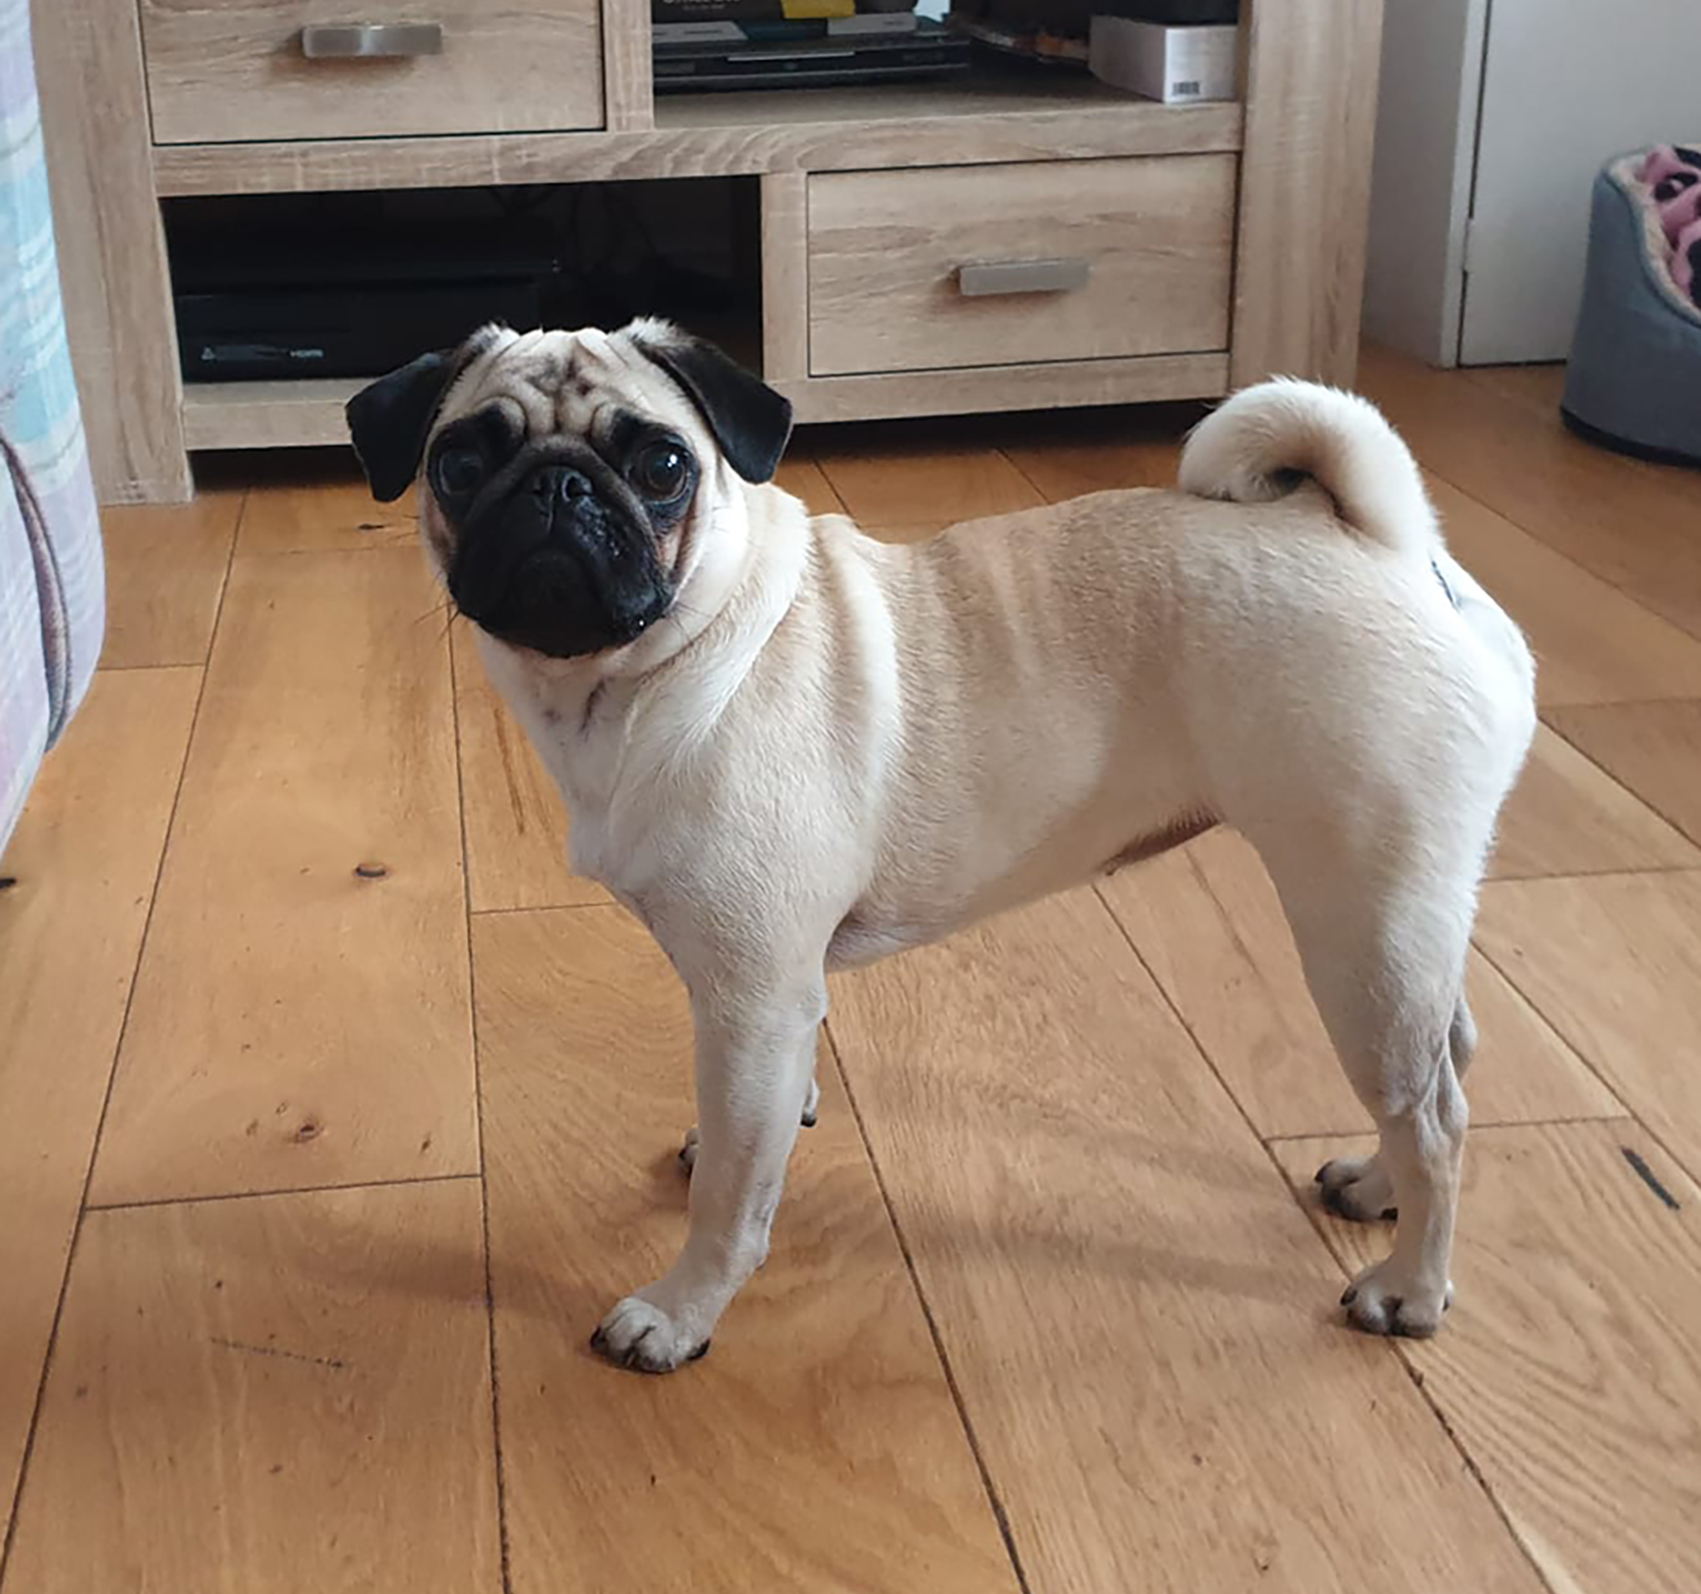 Foster care for Alfie - image Susie on https://pugprotectiontrust.org